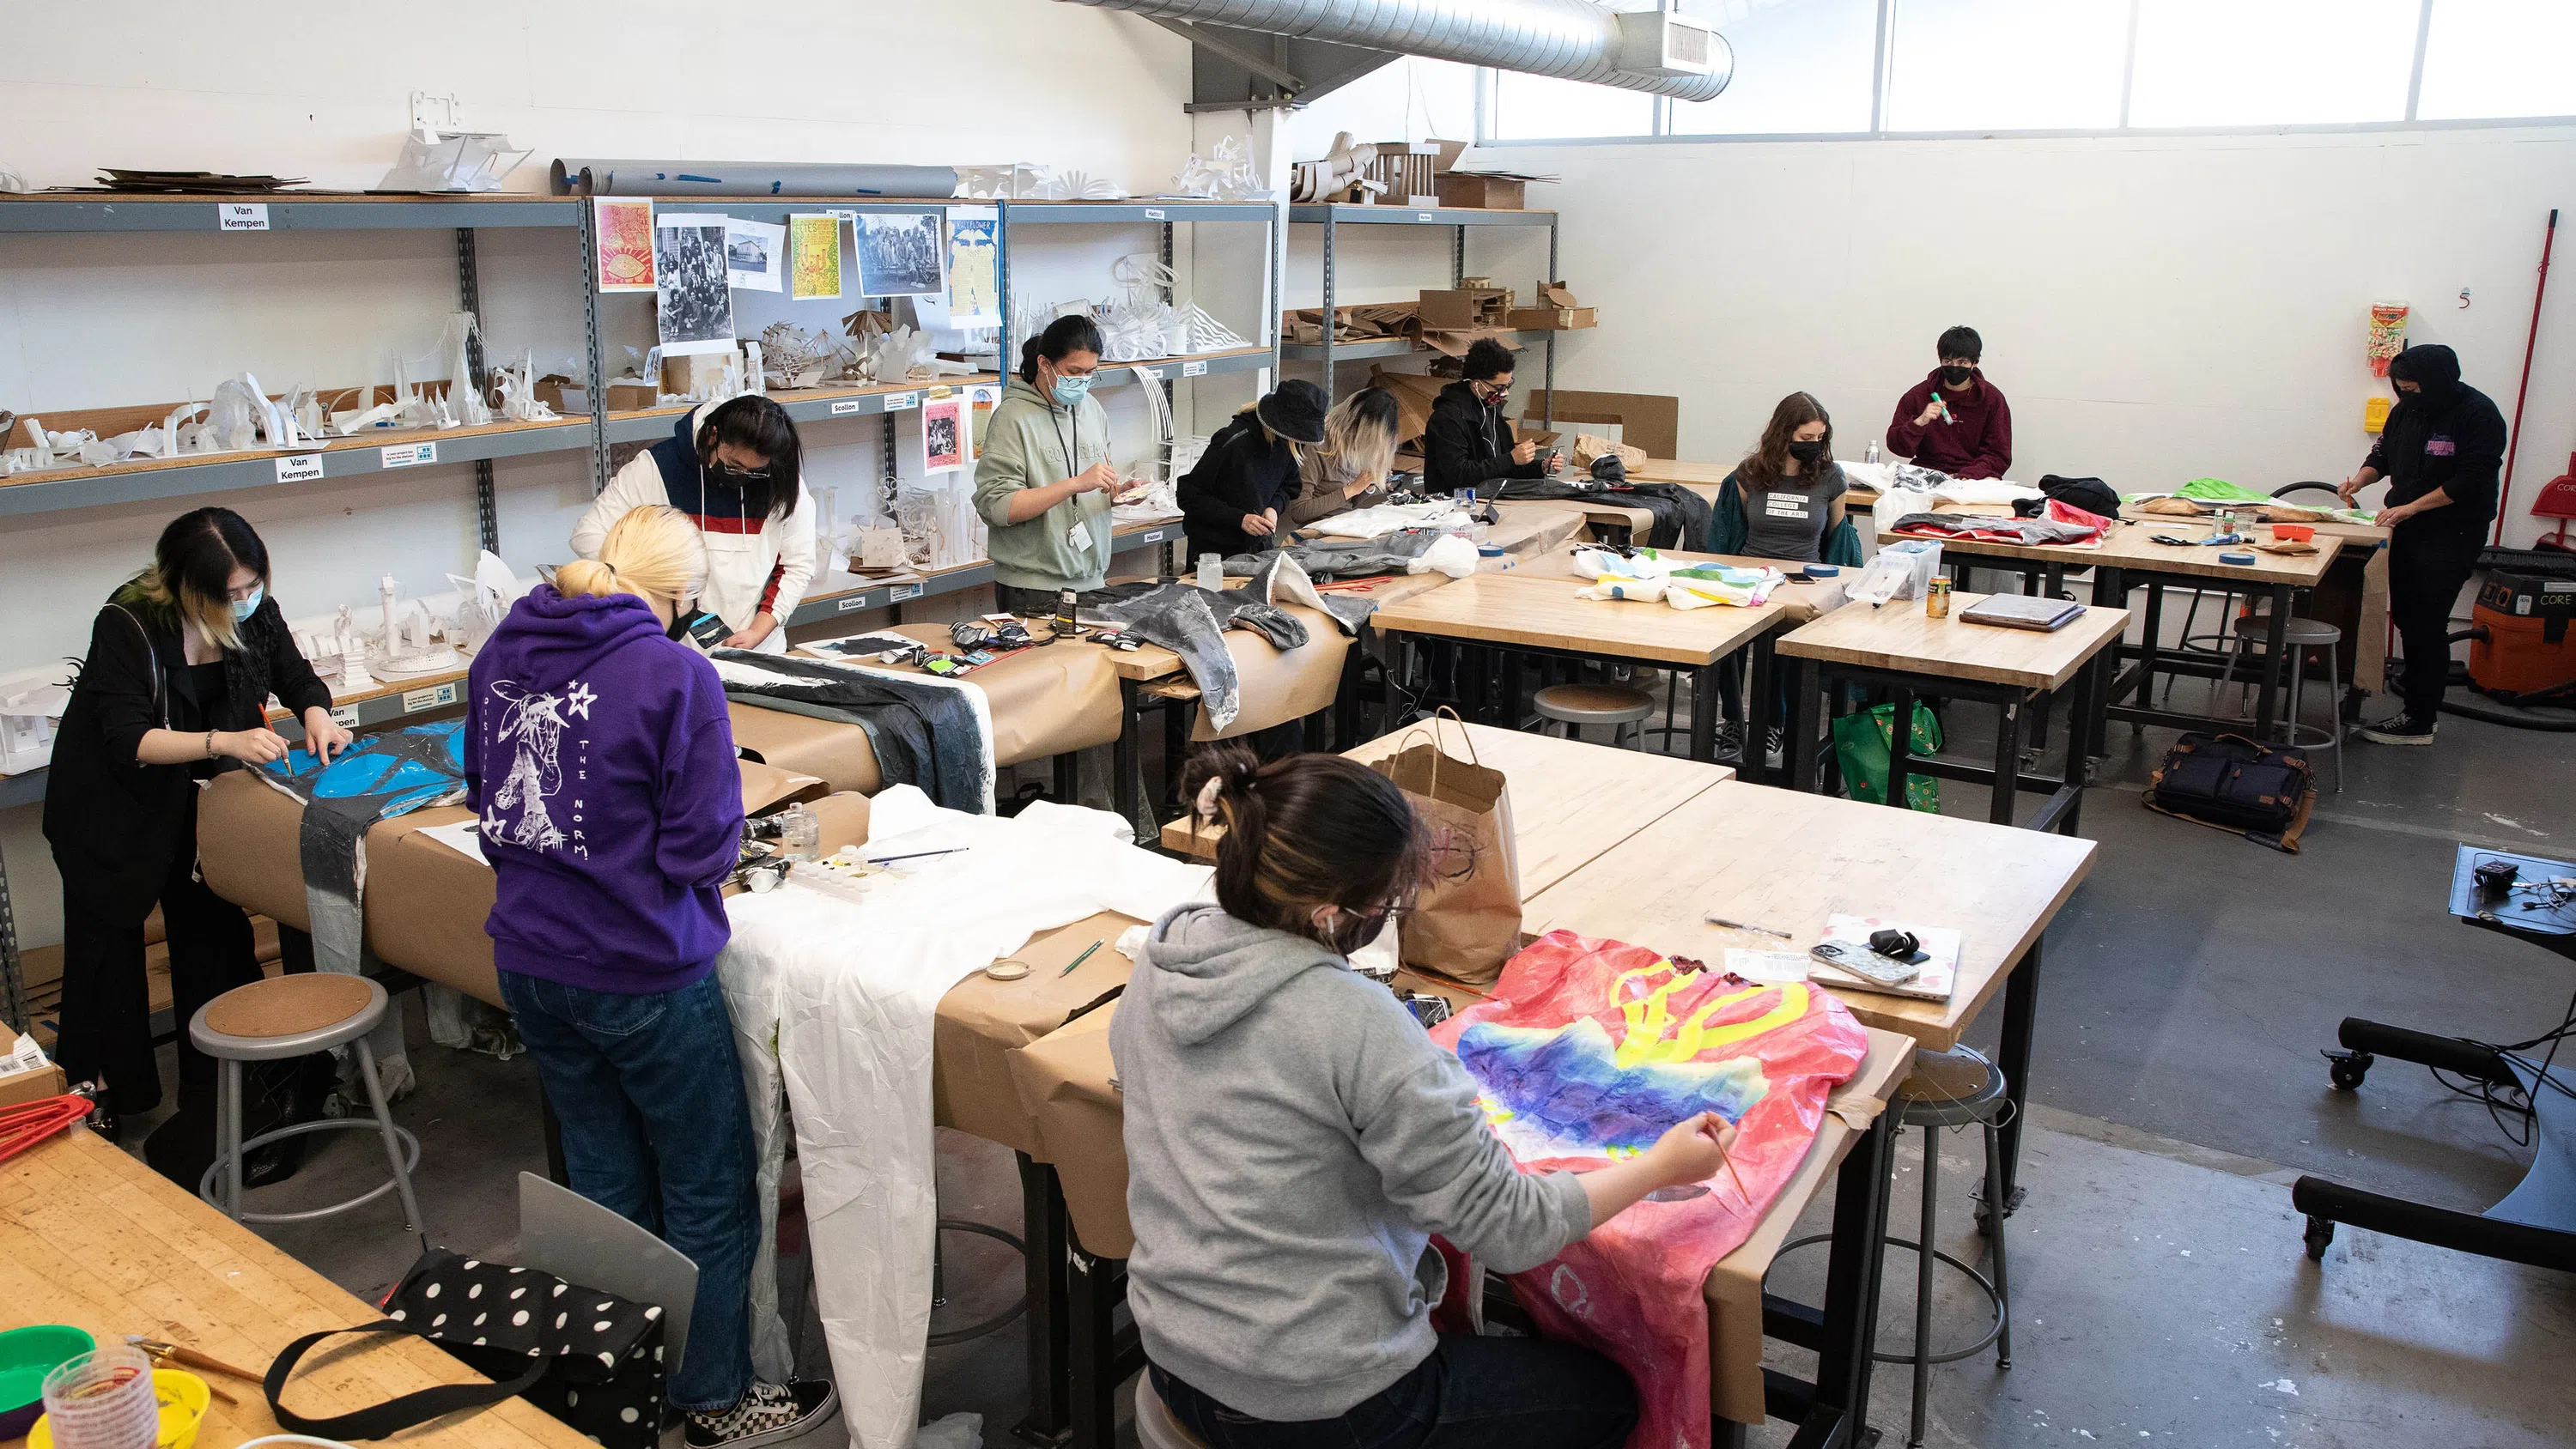 A group of students transform jumpsuits through color, collage, and painting.